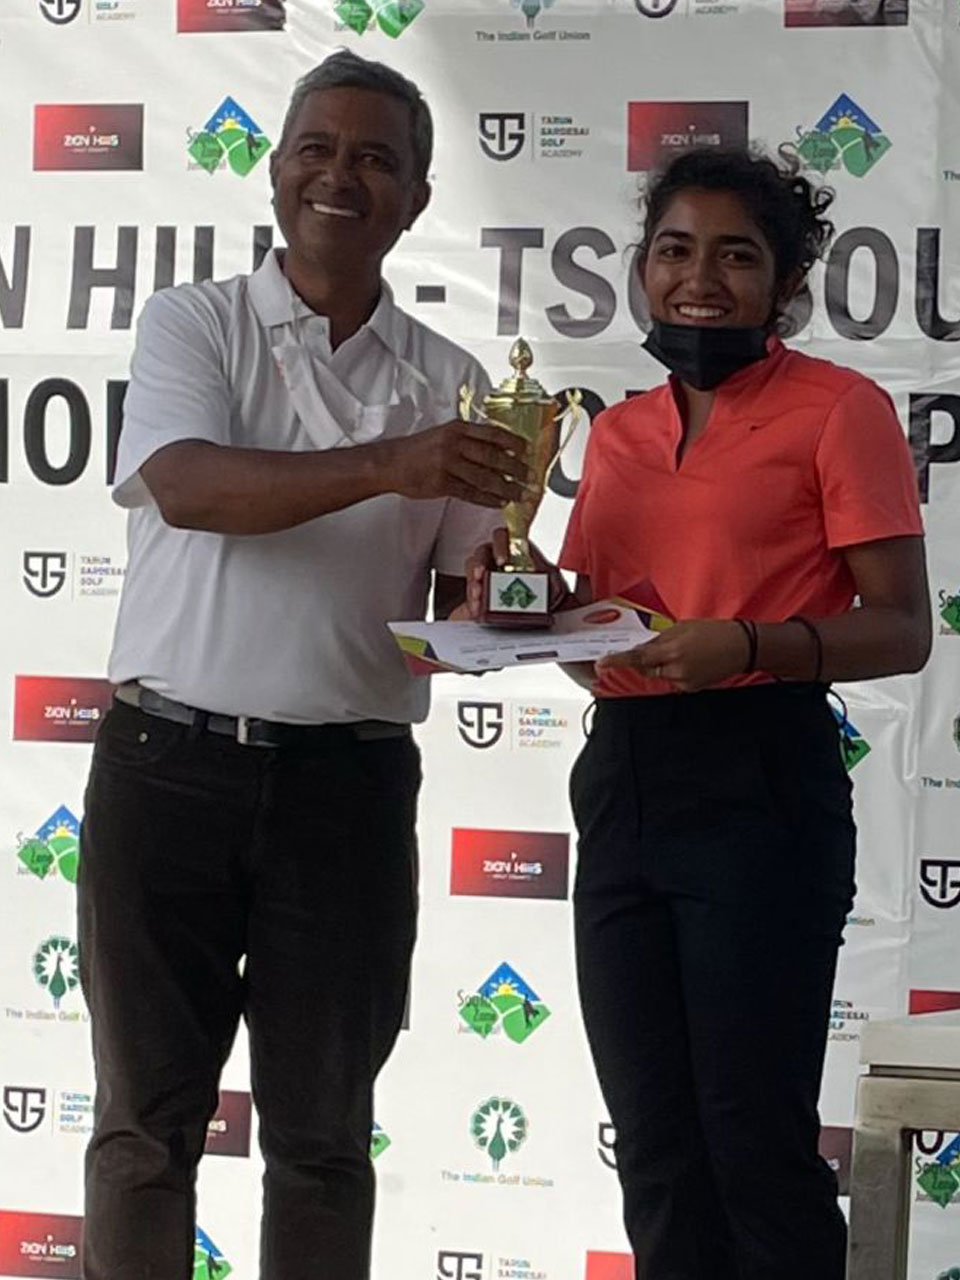 Snigdha Goswami wins in Category A Girls at the Zion Hills